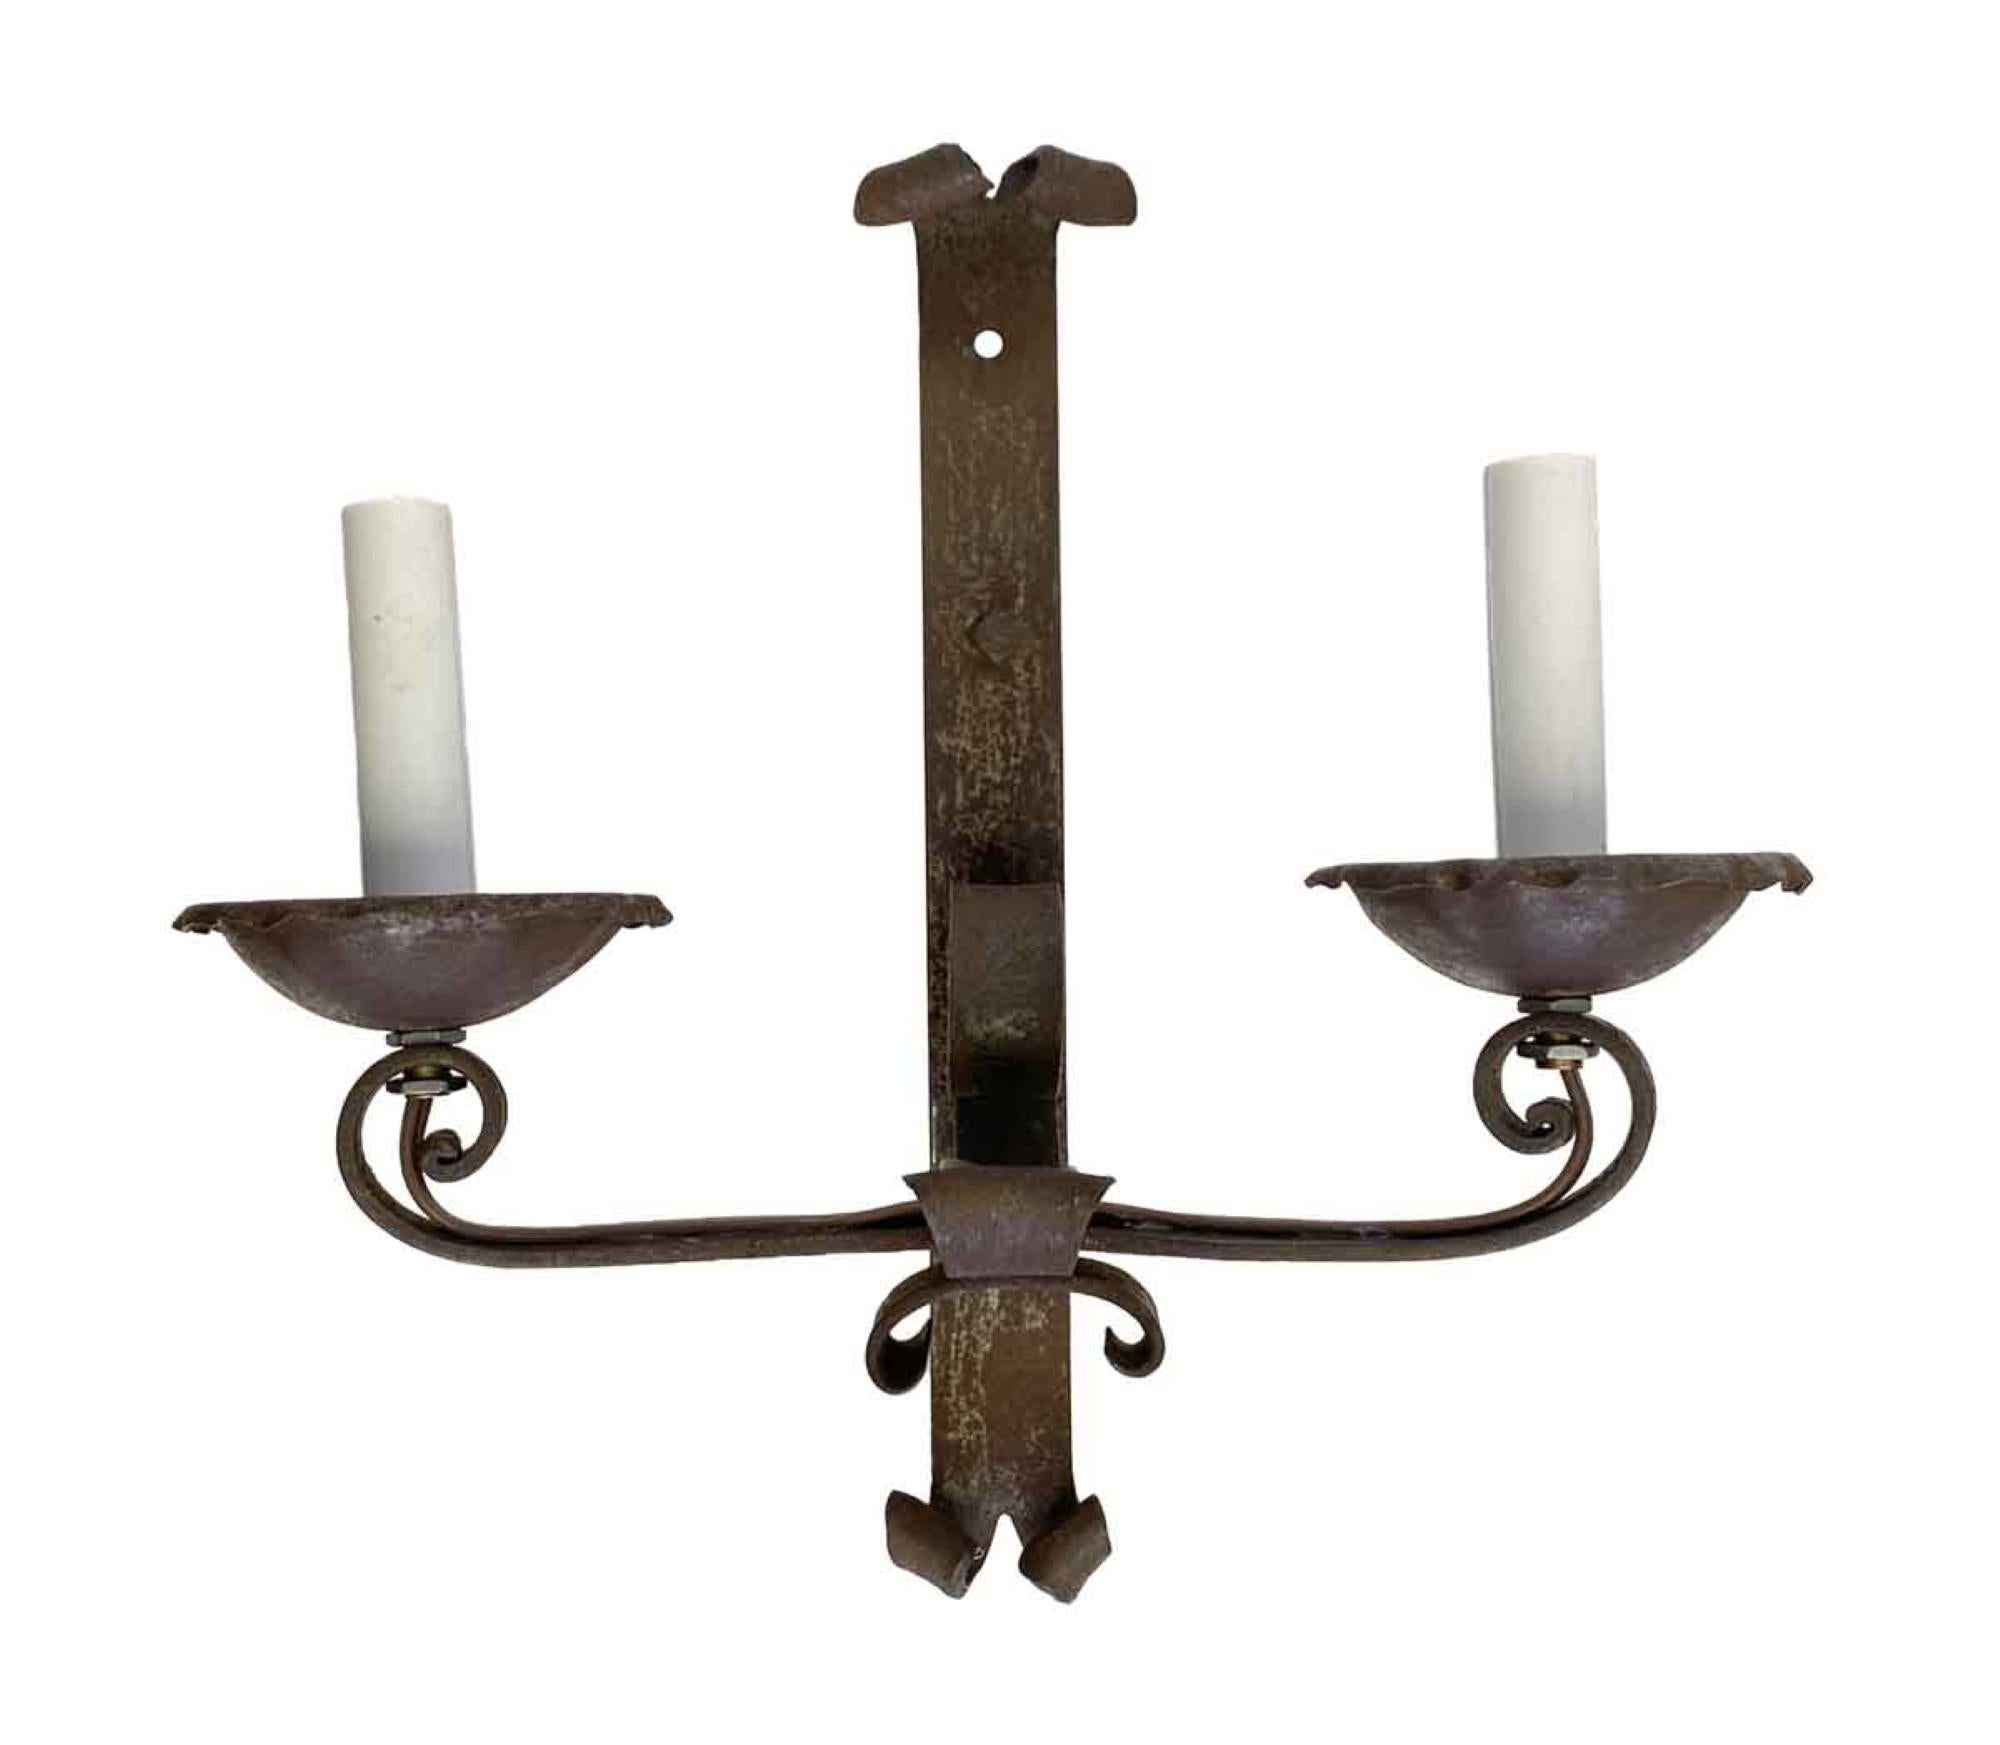 1890s hand hammered wrought iron sconces with scrollwork from France with a black rusted finish. Newly rewired.